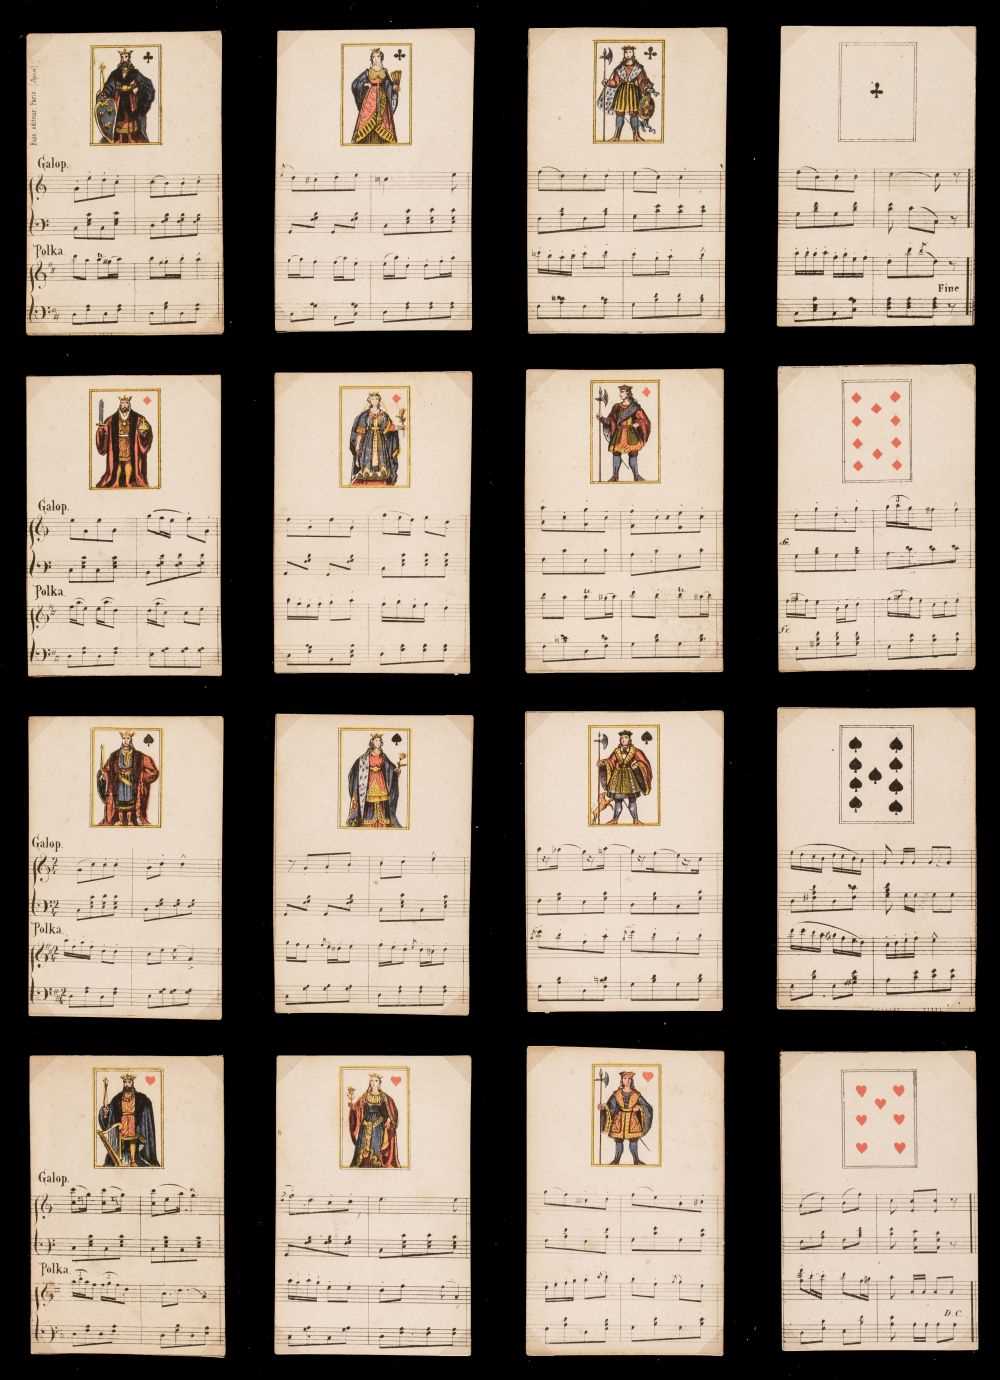 Lot 521 - French playing cards. Cartes Magiques Musicales, Paris: Bass, circa 1830